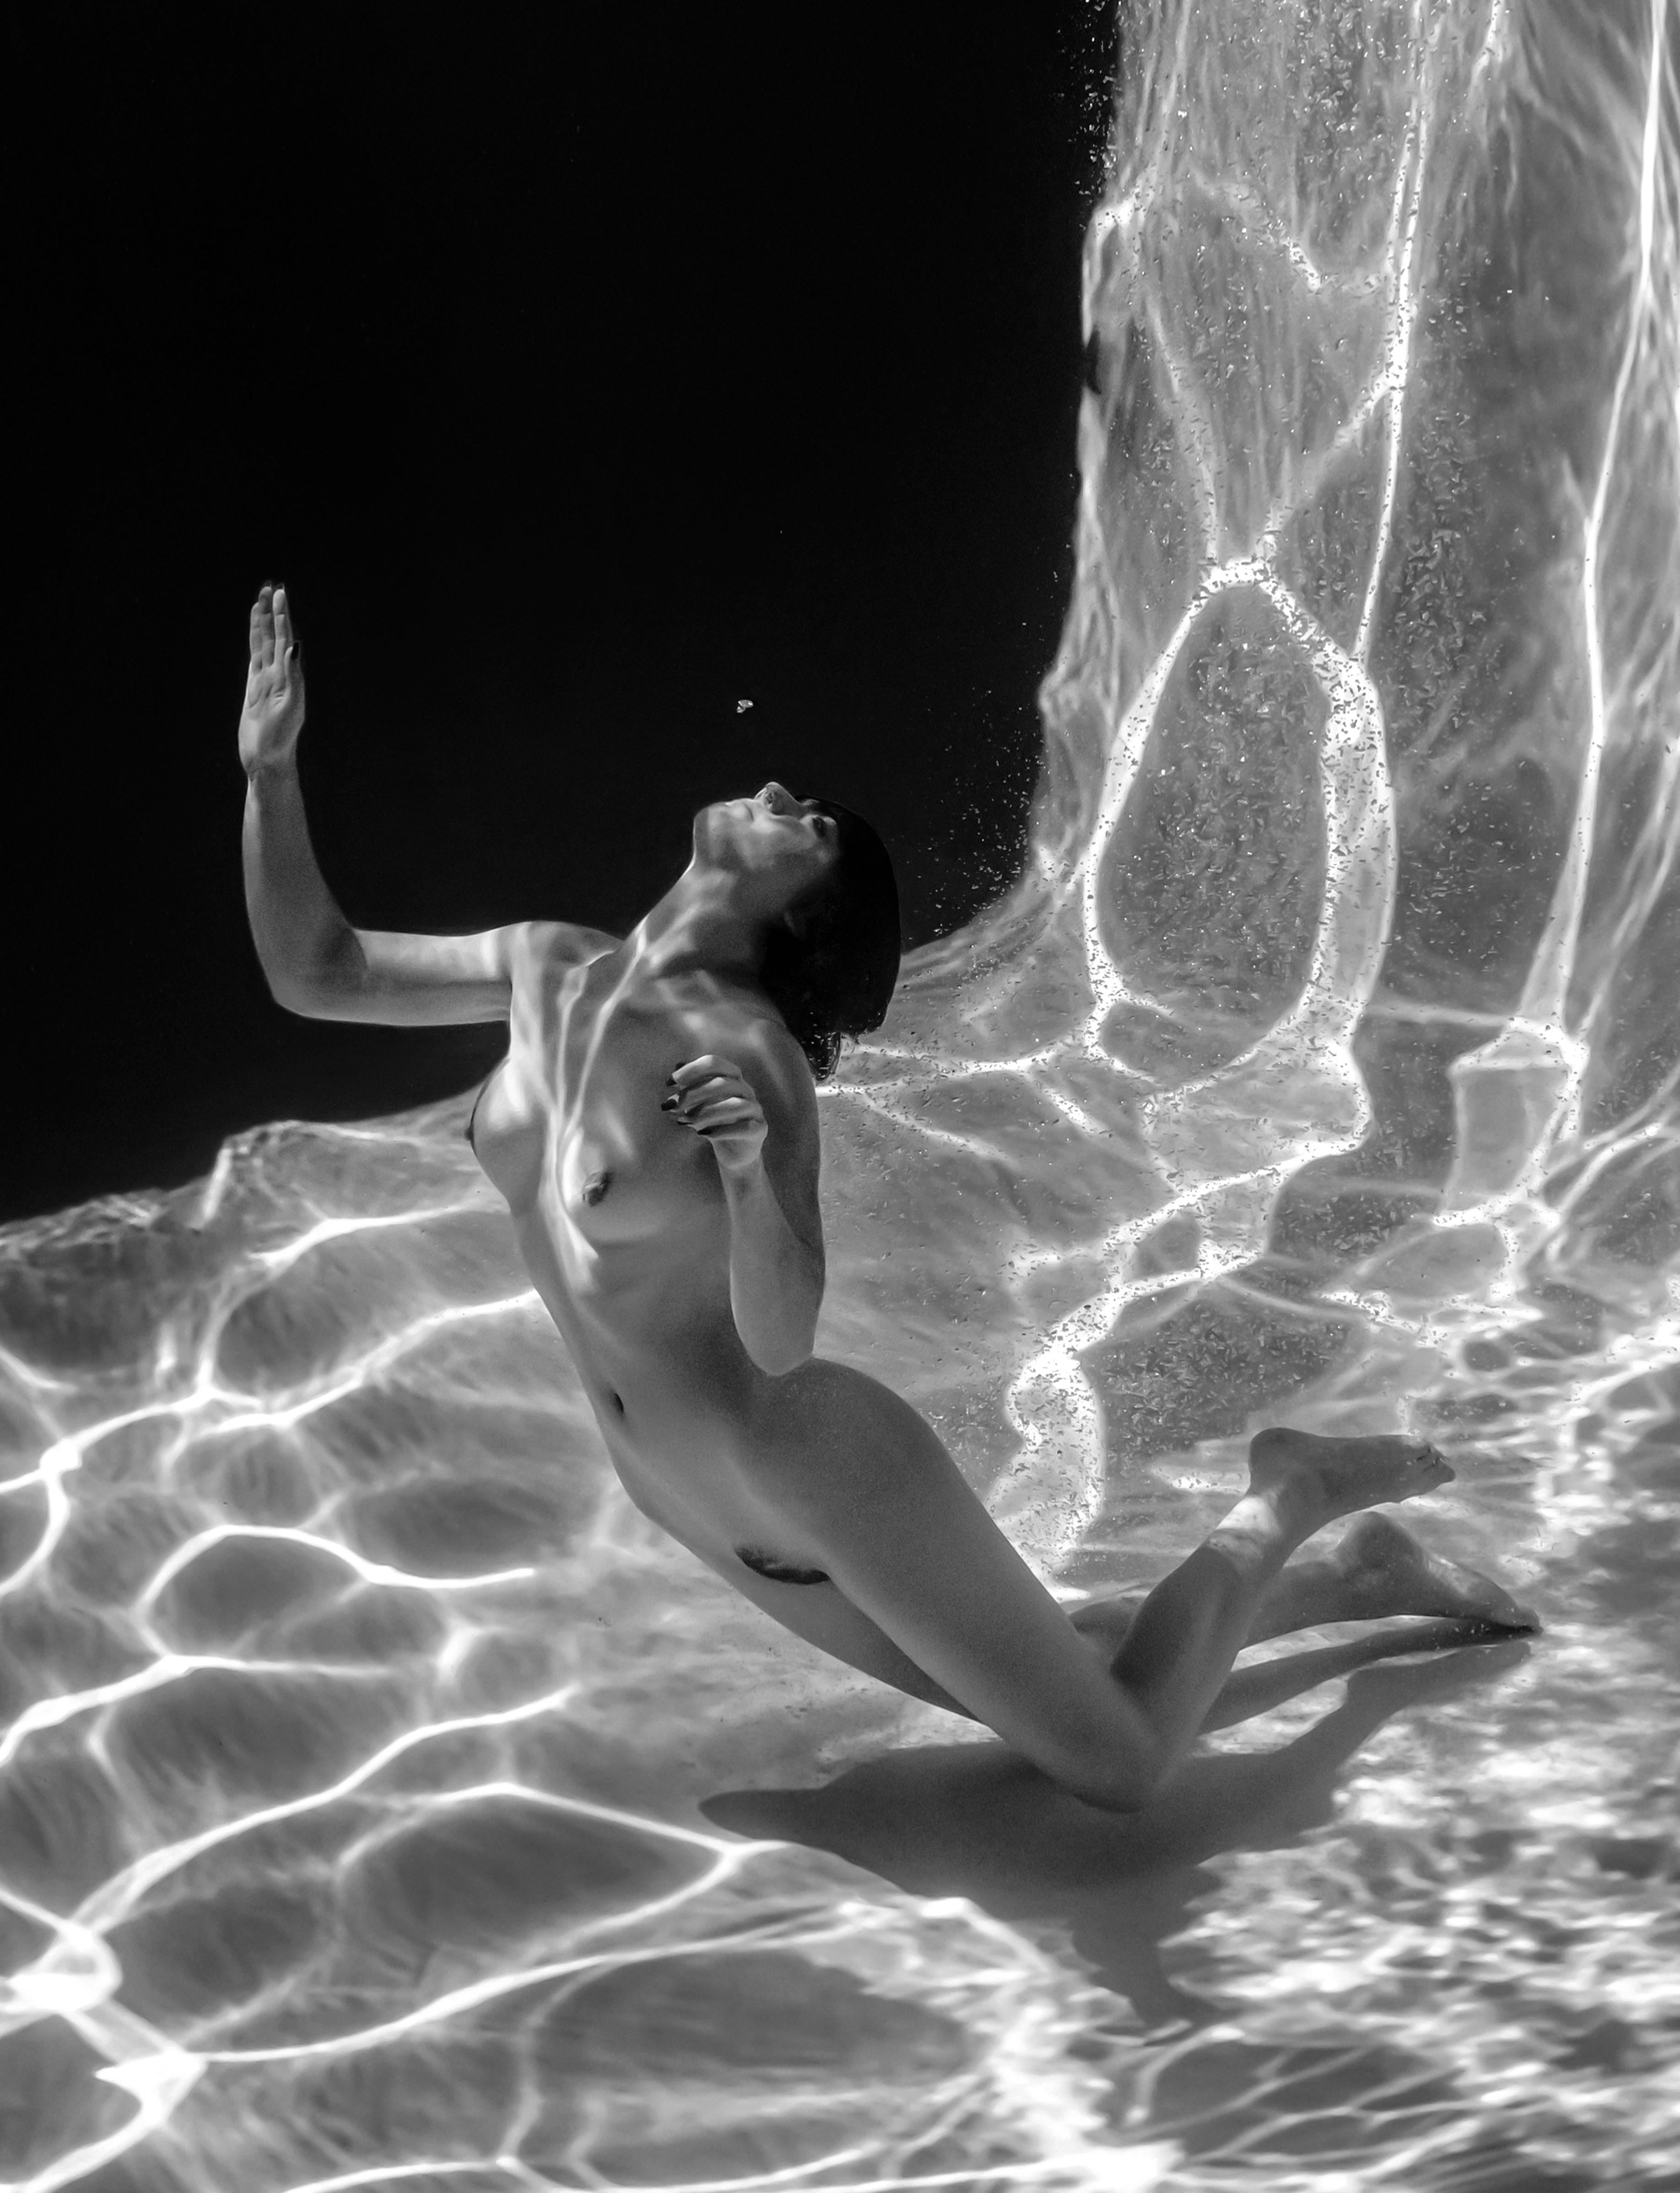 Marble Cave (triptych) - underwater b&w nude photograph - 3 prints 24